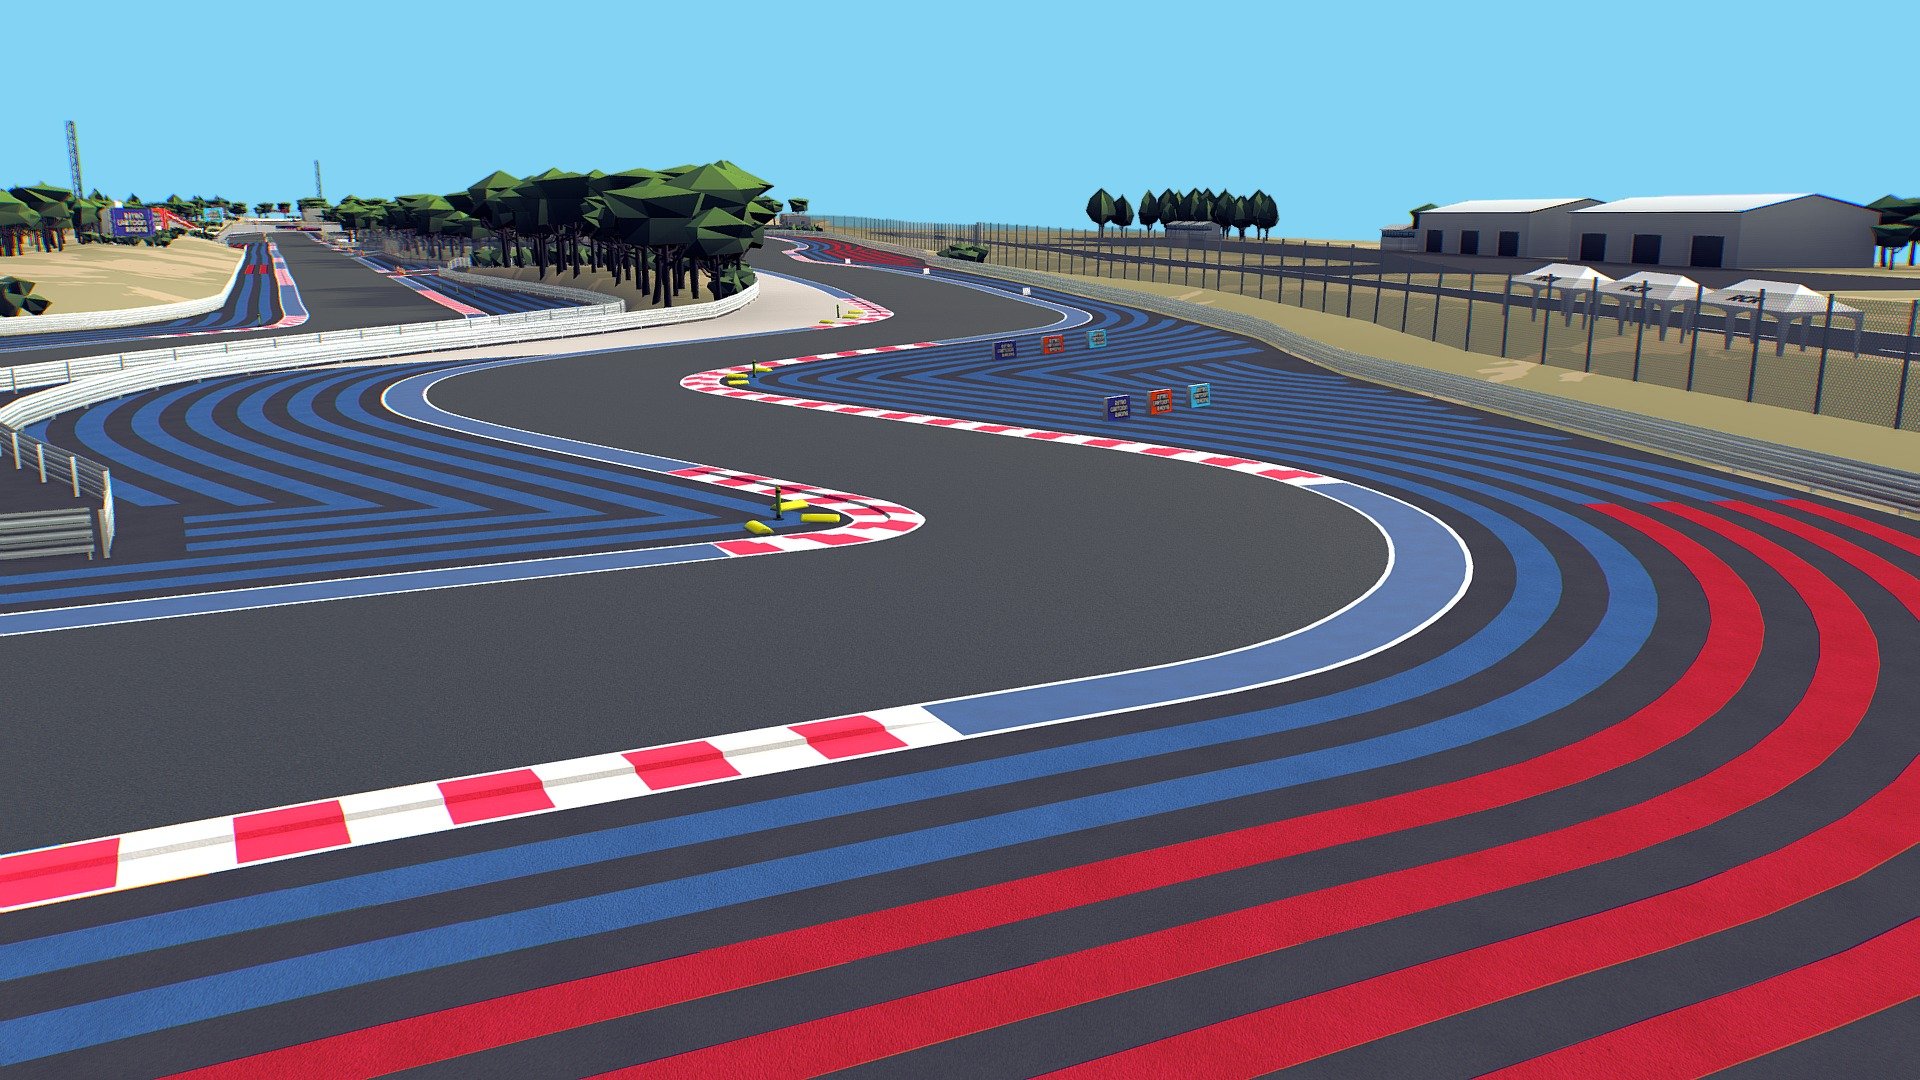 Driving on track in Unity engine:
https://www.youtube.com/watch?v=FXsIMbEf_Jk&amp;t=12s

Cartoon style model of race track, located near Castellet, east of Marseille, France. It was built in 1969, and opened in 1970. Mostly it was sponsored by Paul Ricard, who wanted to experience the challenges on making a race circuit. At the time it was opened, it was considered the safest track in the world. Wide tarmac run off areas with red and blue stripes make a lot of room for mistakes, and give the track a unique look. Thanks to warm winters of south France, this track is a popular location for winter off-season testing. Since 2018 it also holds Formula 1 French Grand Prix 3d model